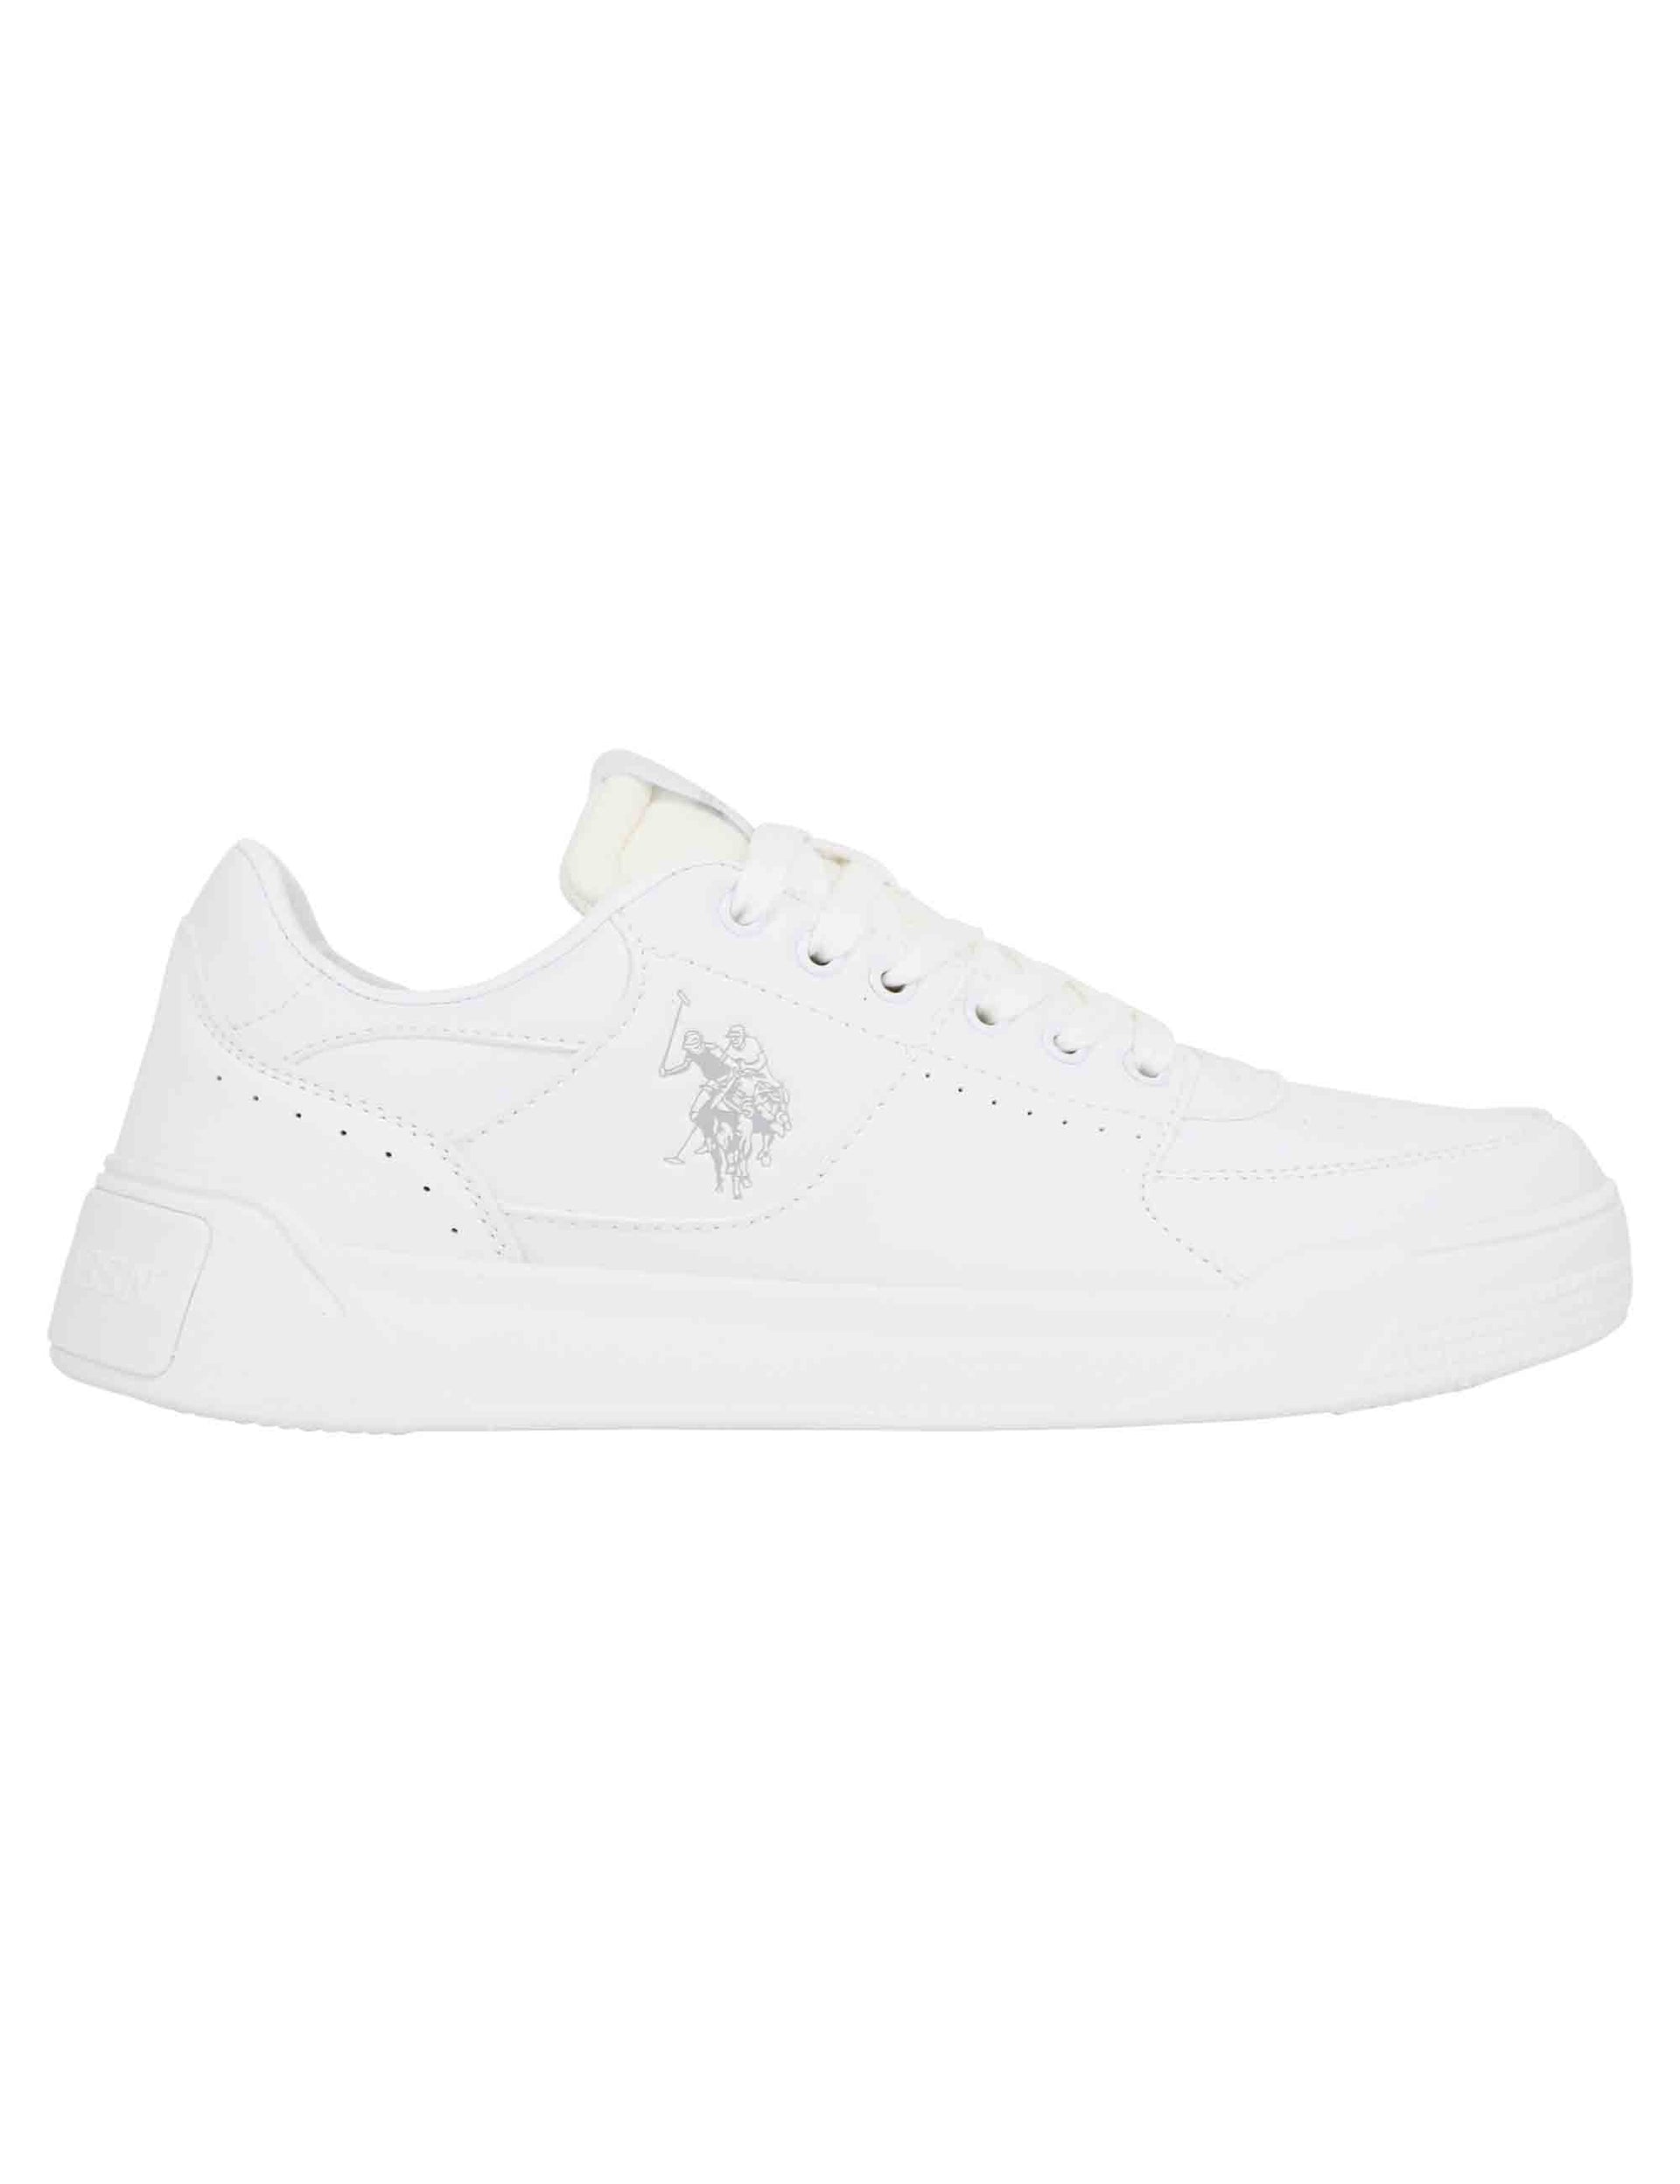 Men's sneakers in white eco-leather with side logo